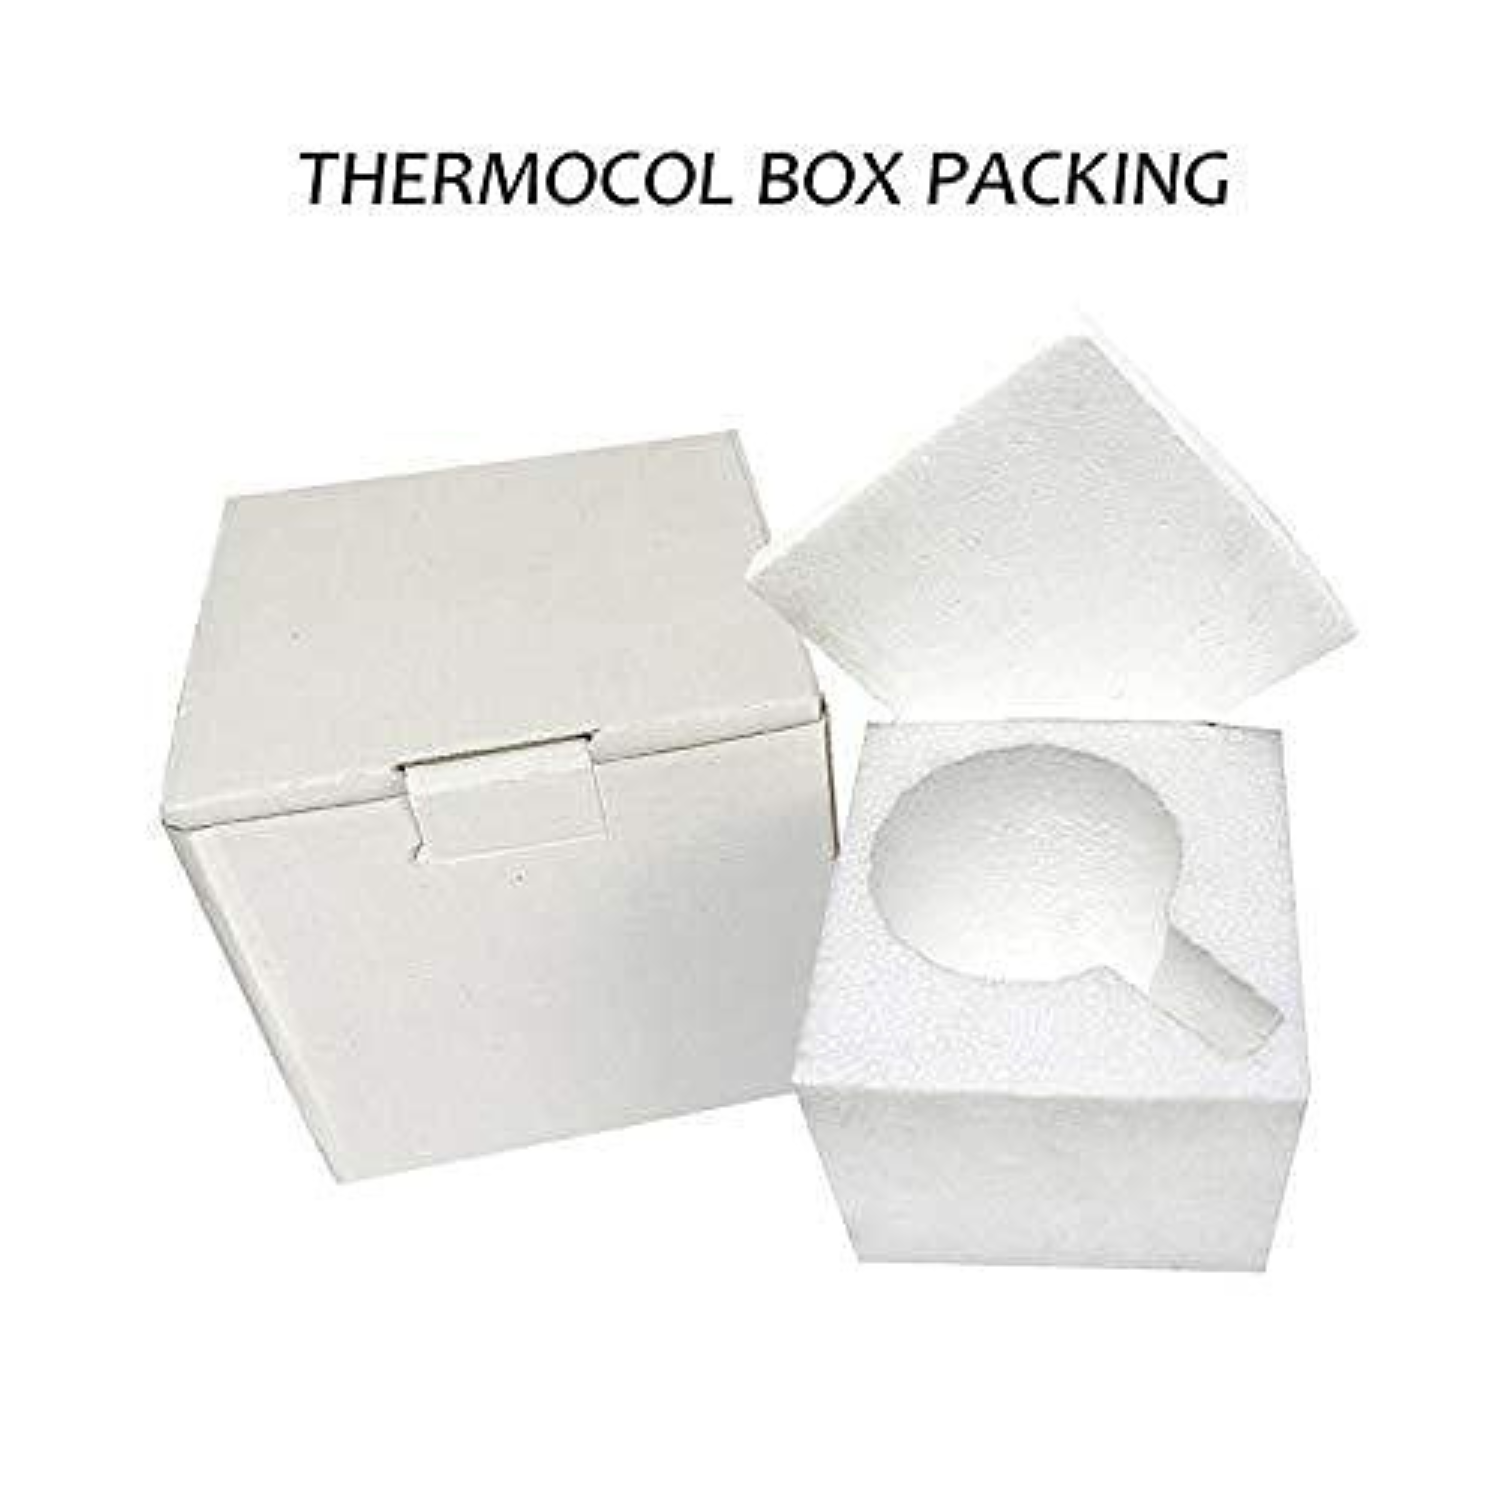 Thermocal Box Packing